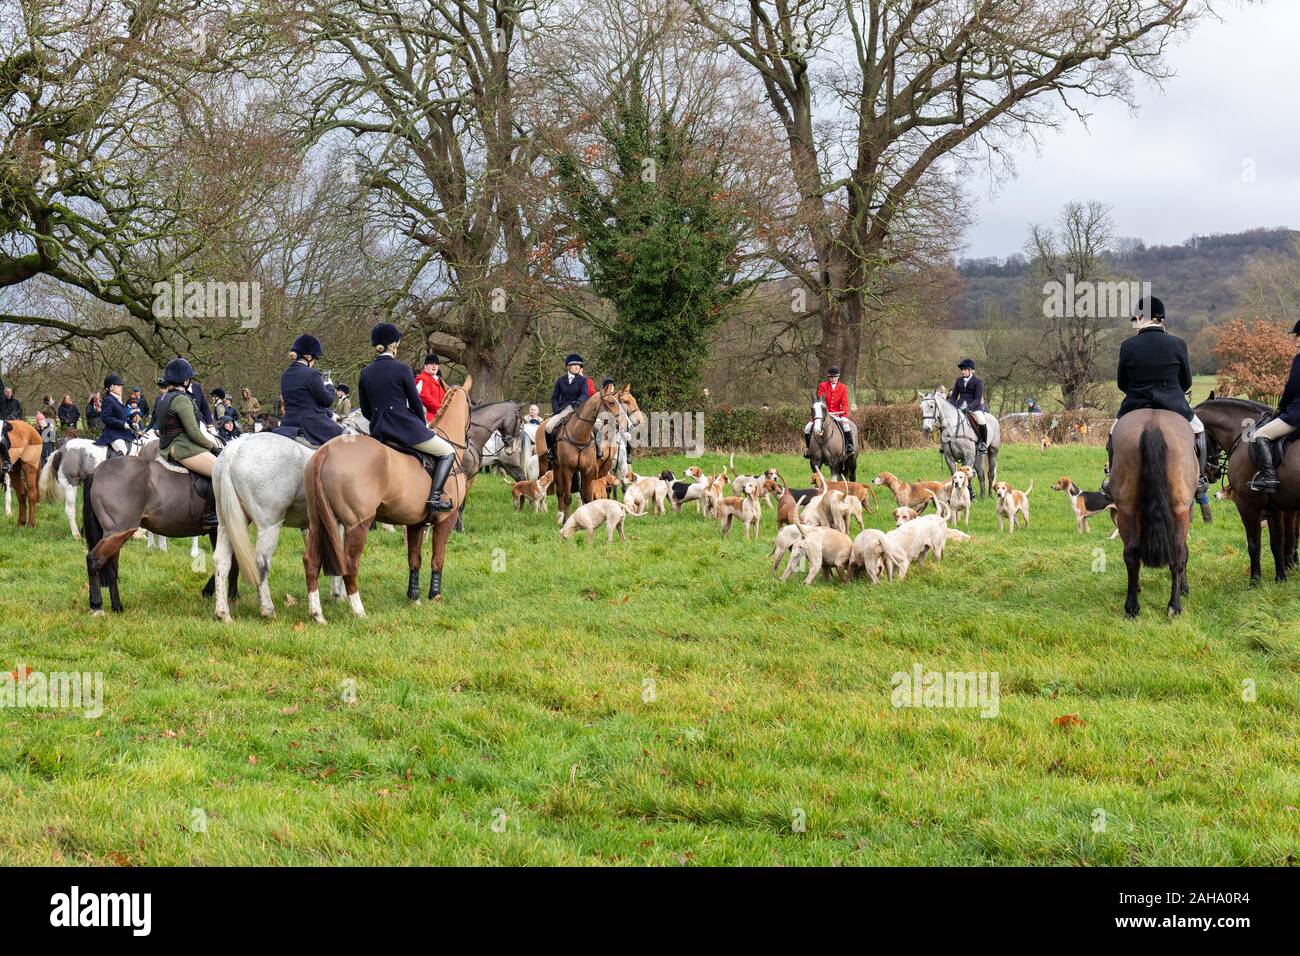 The traditional Avon Vale hunt held annually on Boxing Day from Lacock village, Wiltshire, England, UK Stock Photo